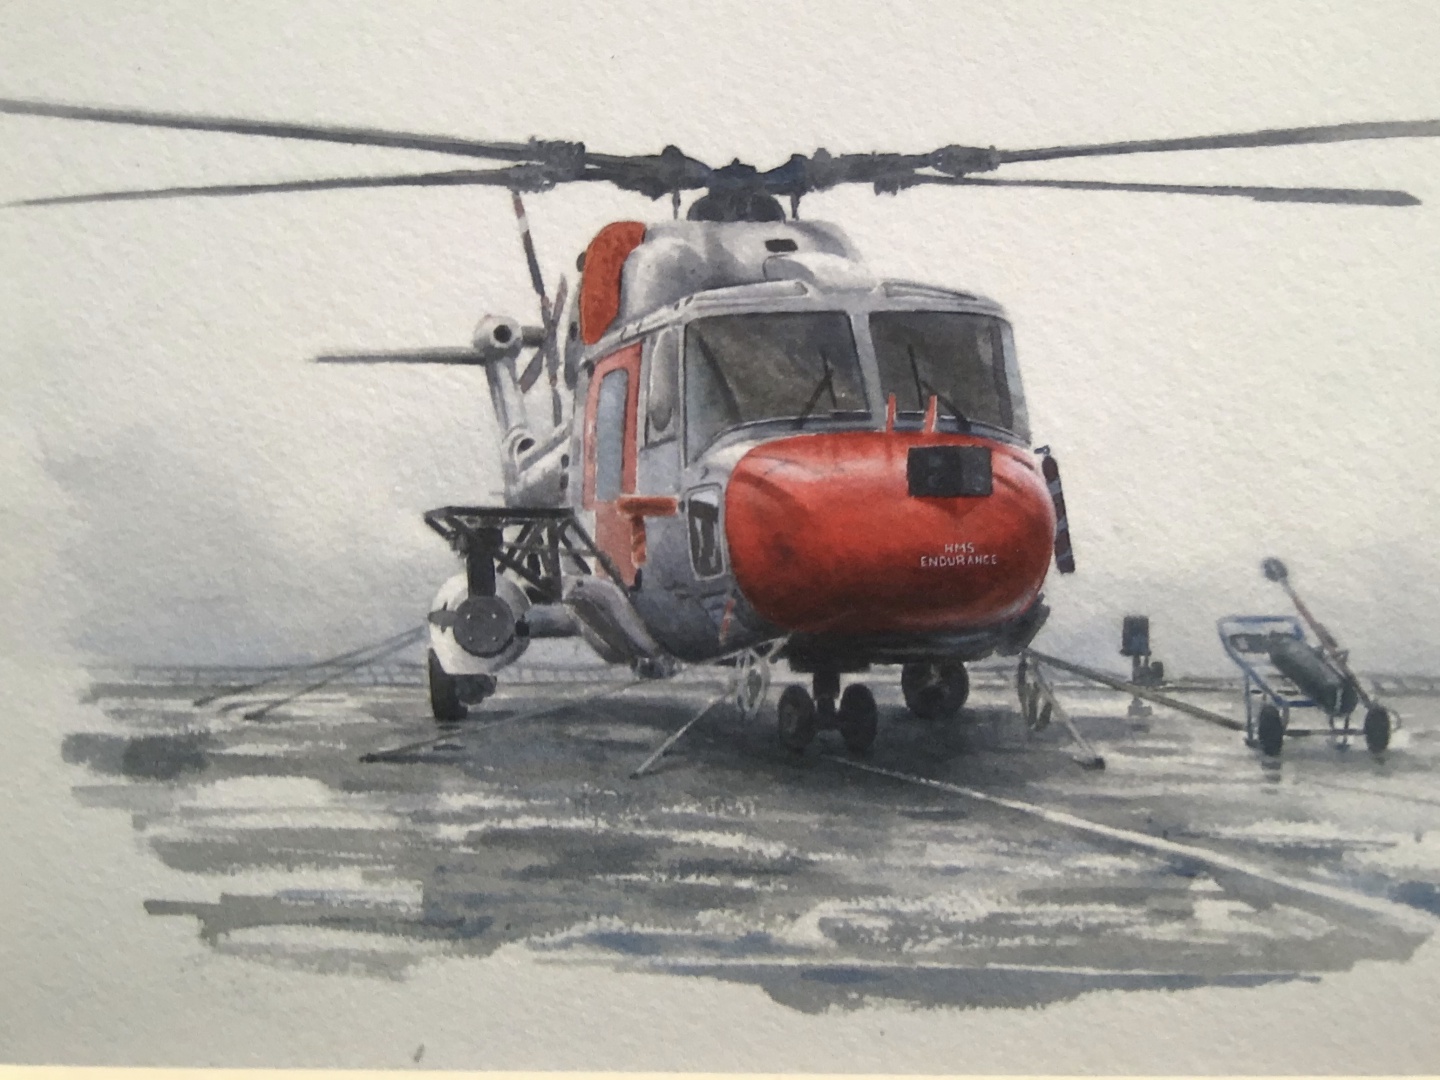 HMS ENDURANCE's Lynx helicopter 2008.  In Antarctica